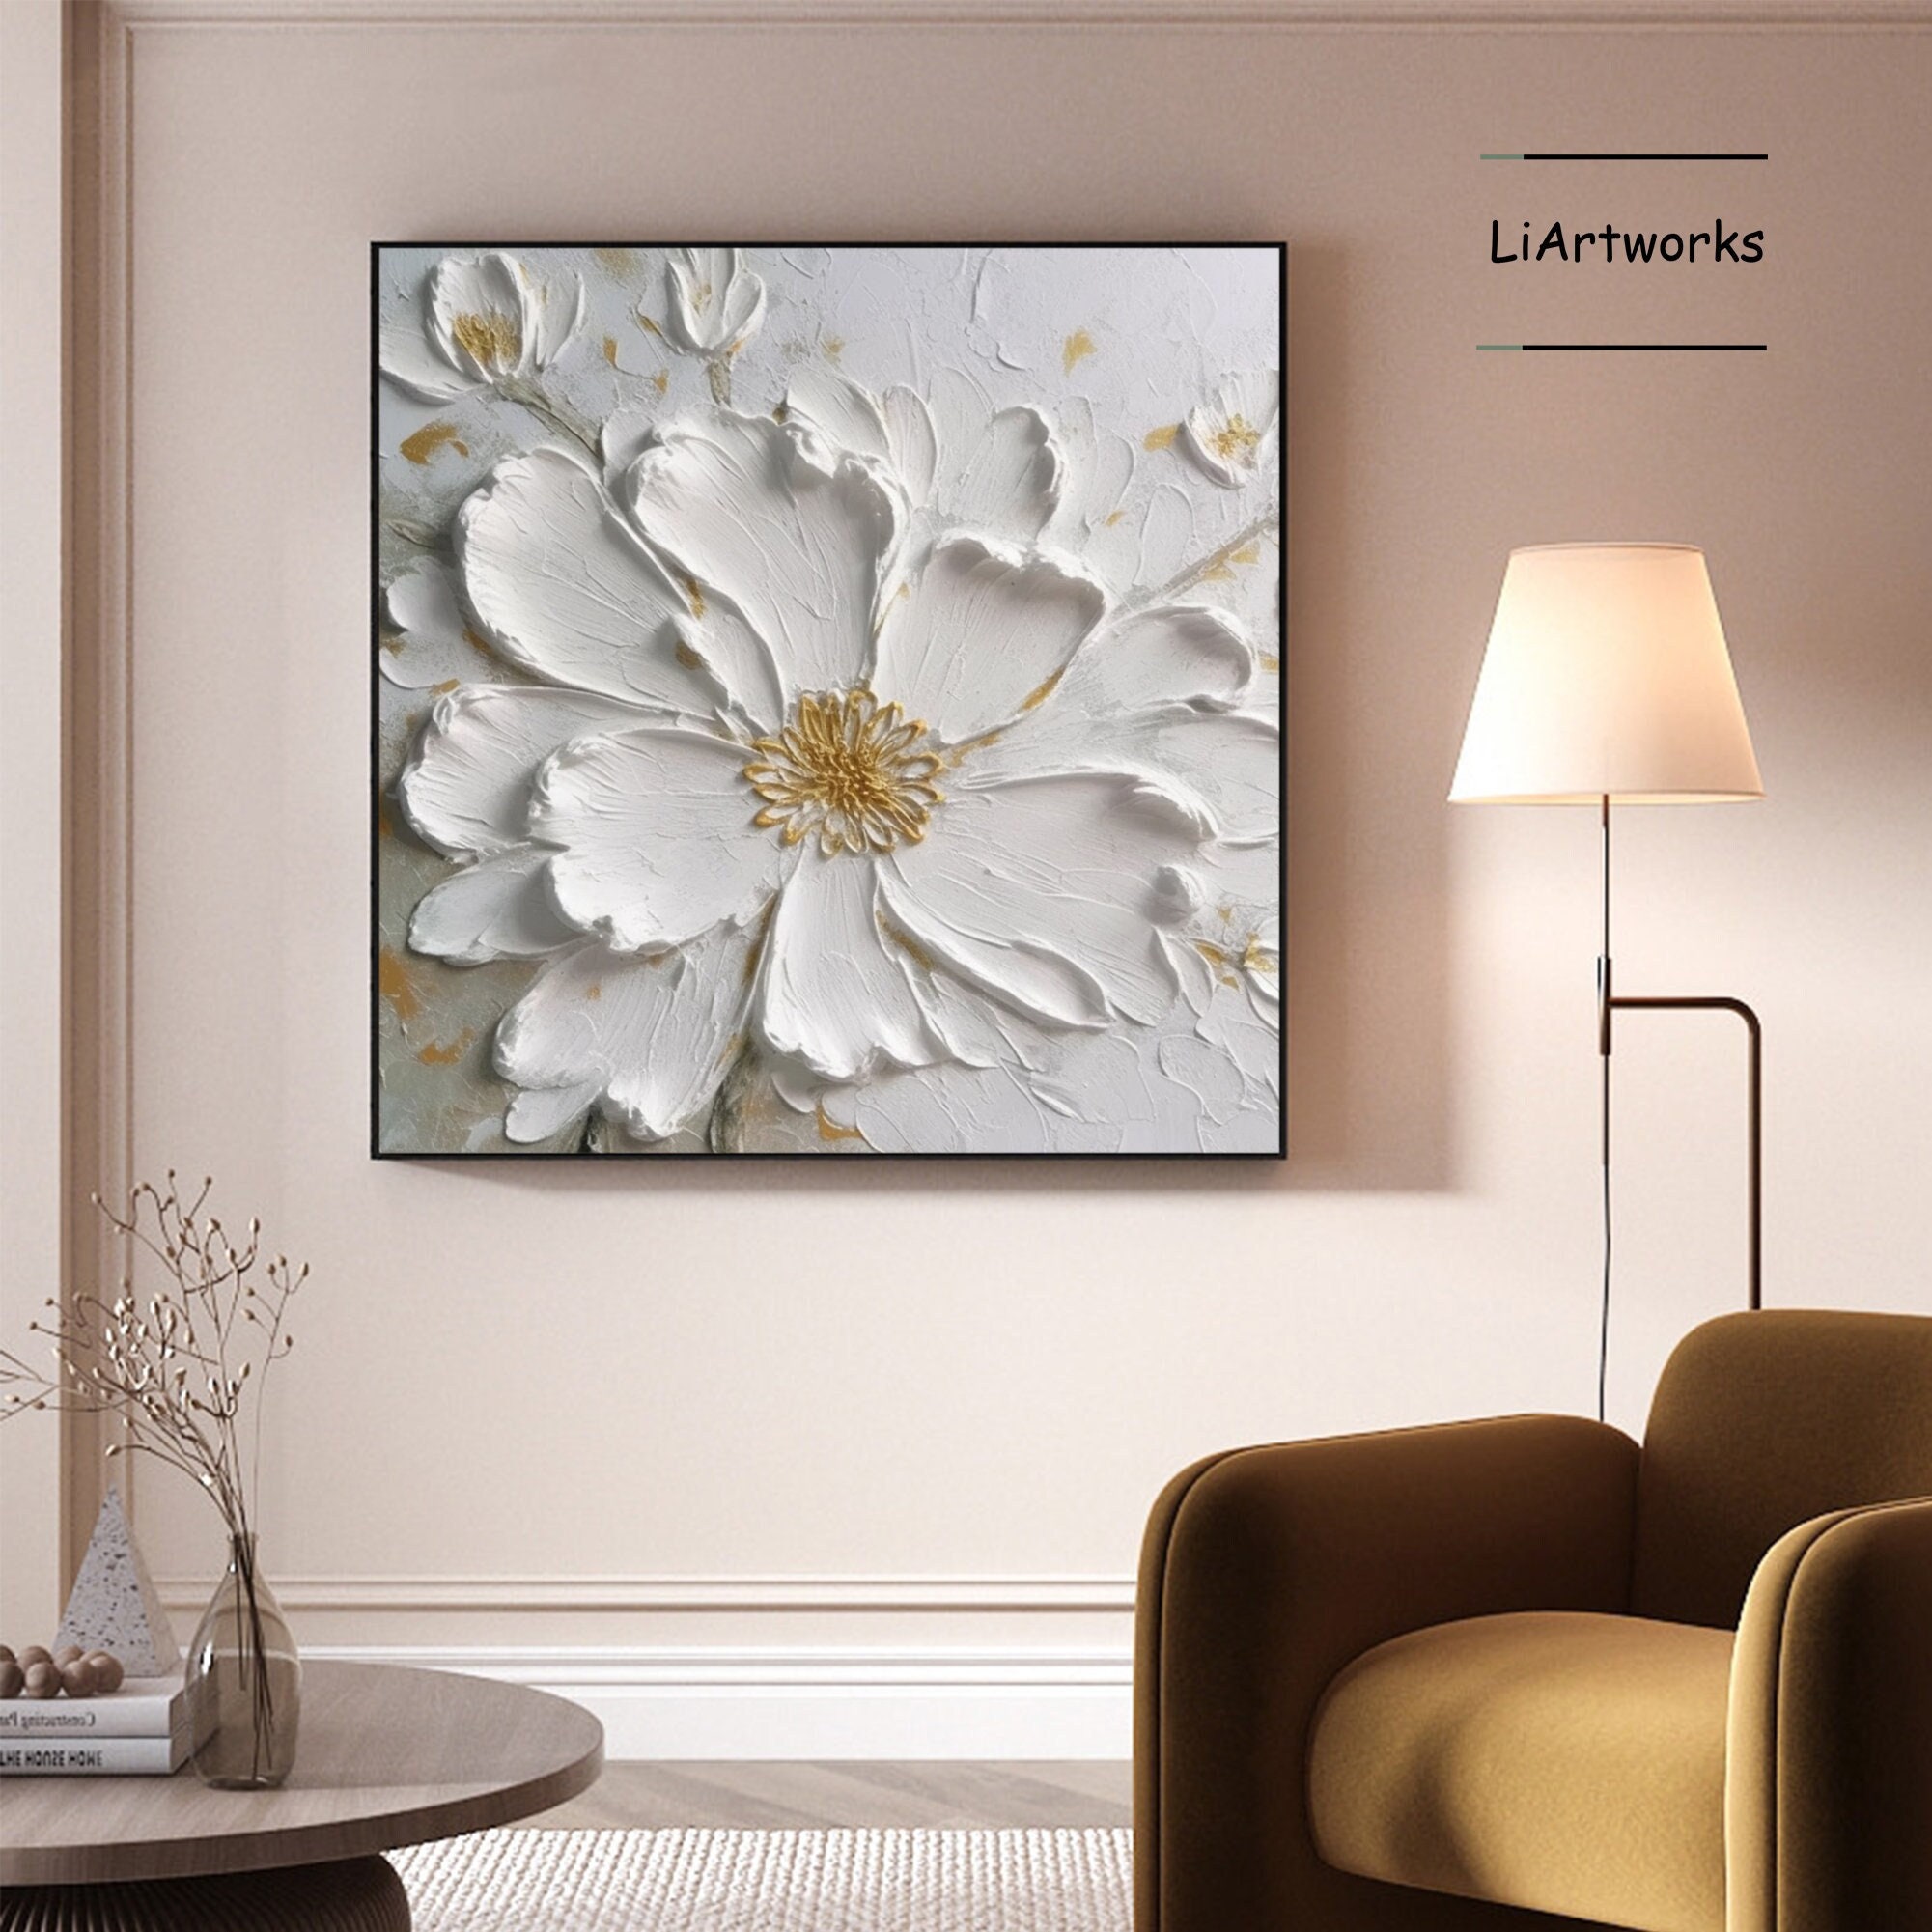 3D White Abstract Flower Oil Painting on Canvaswhite and Gold - Etsy